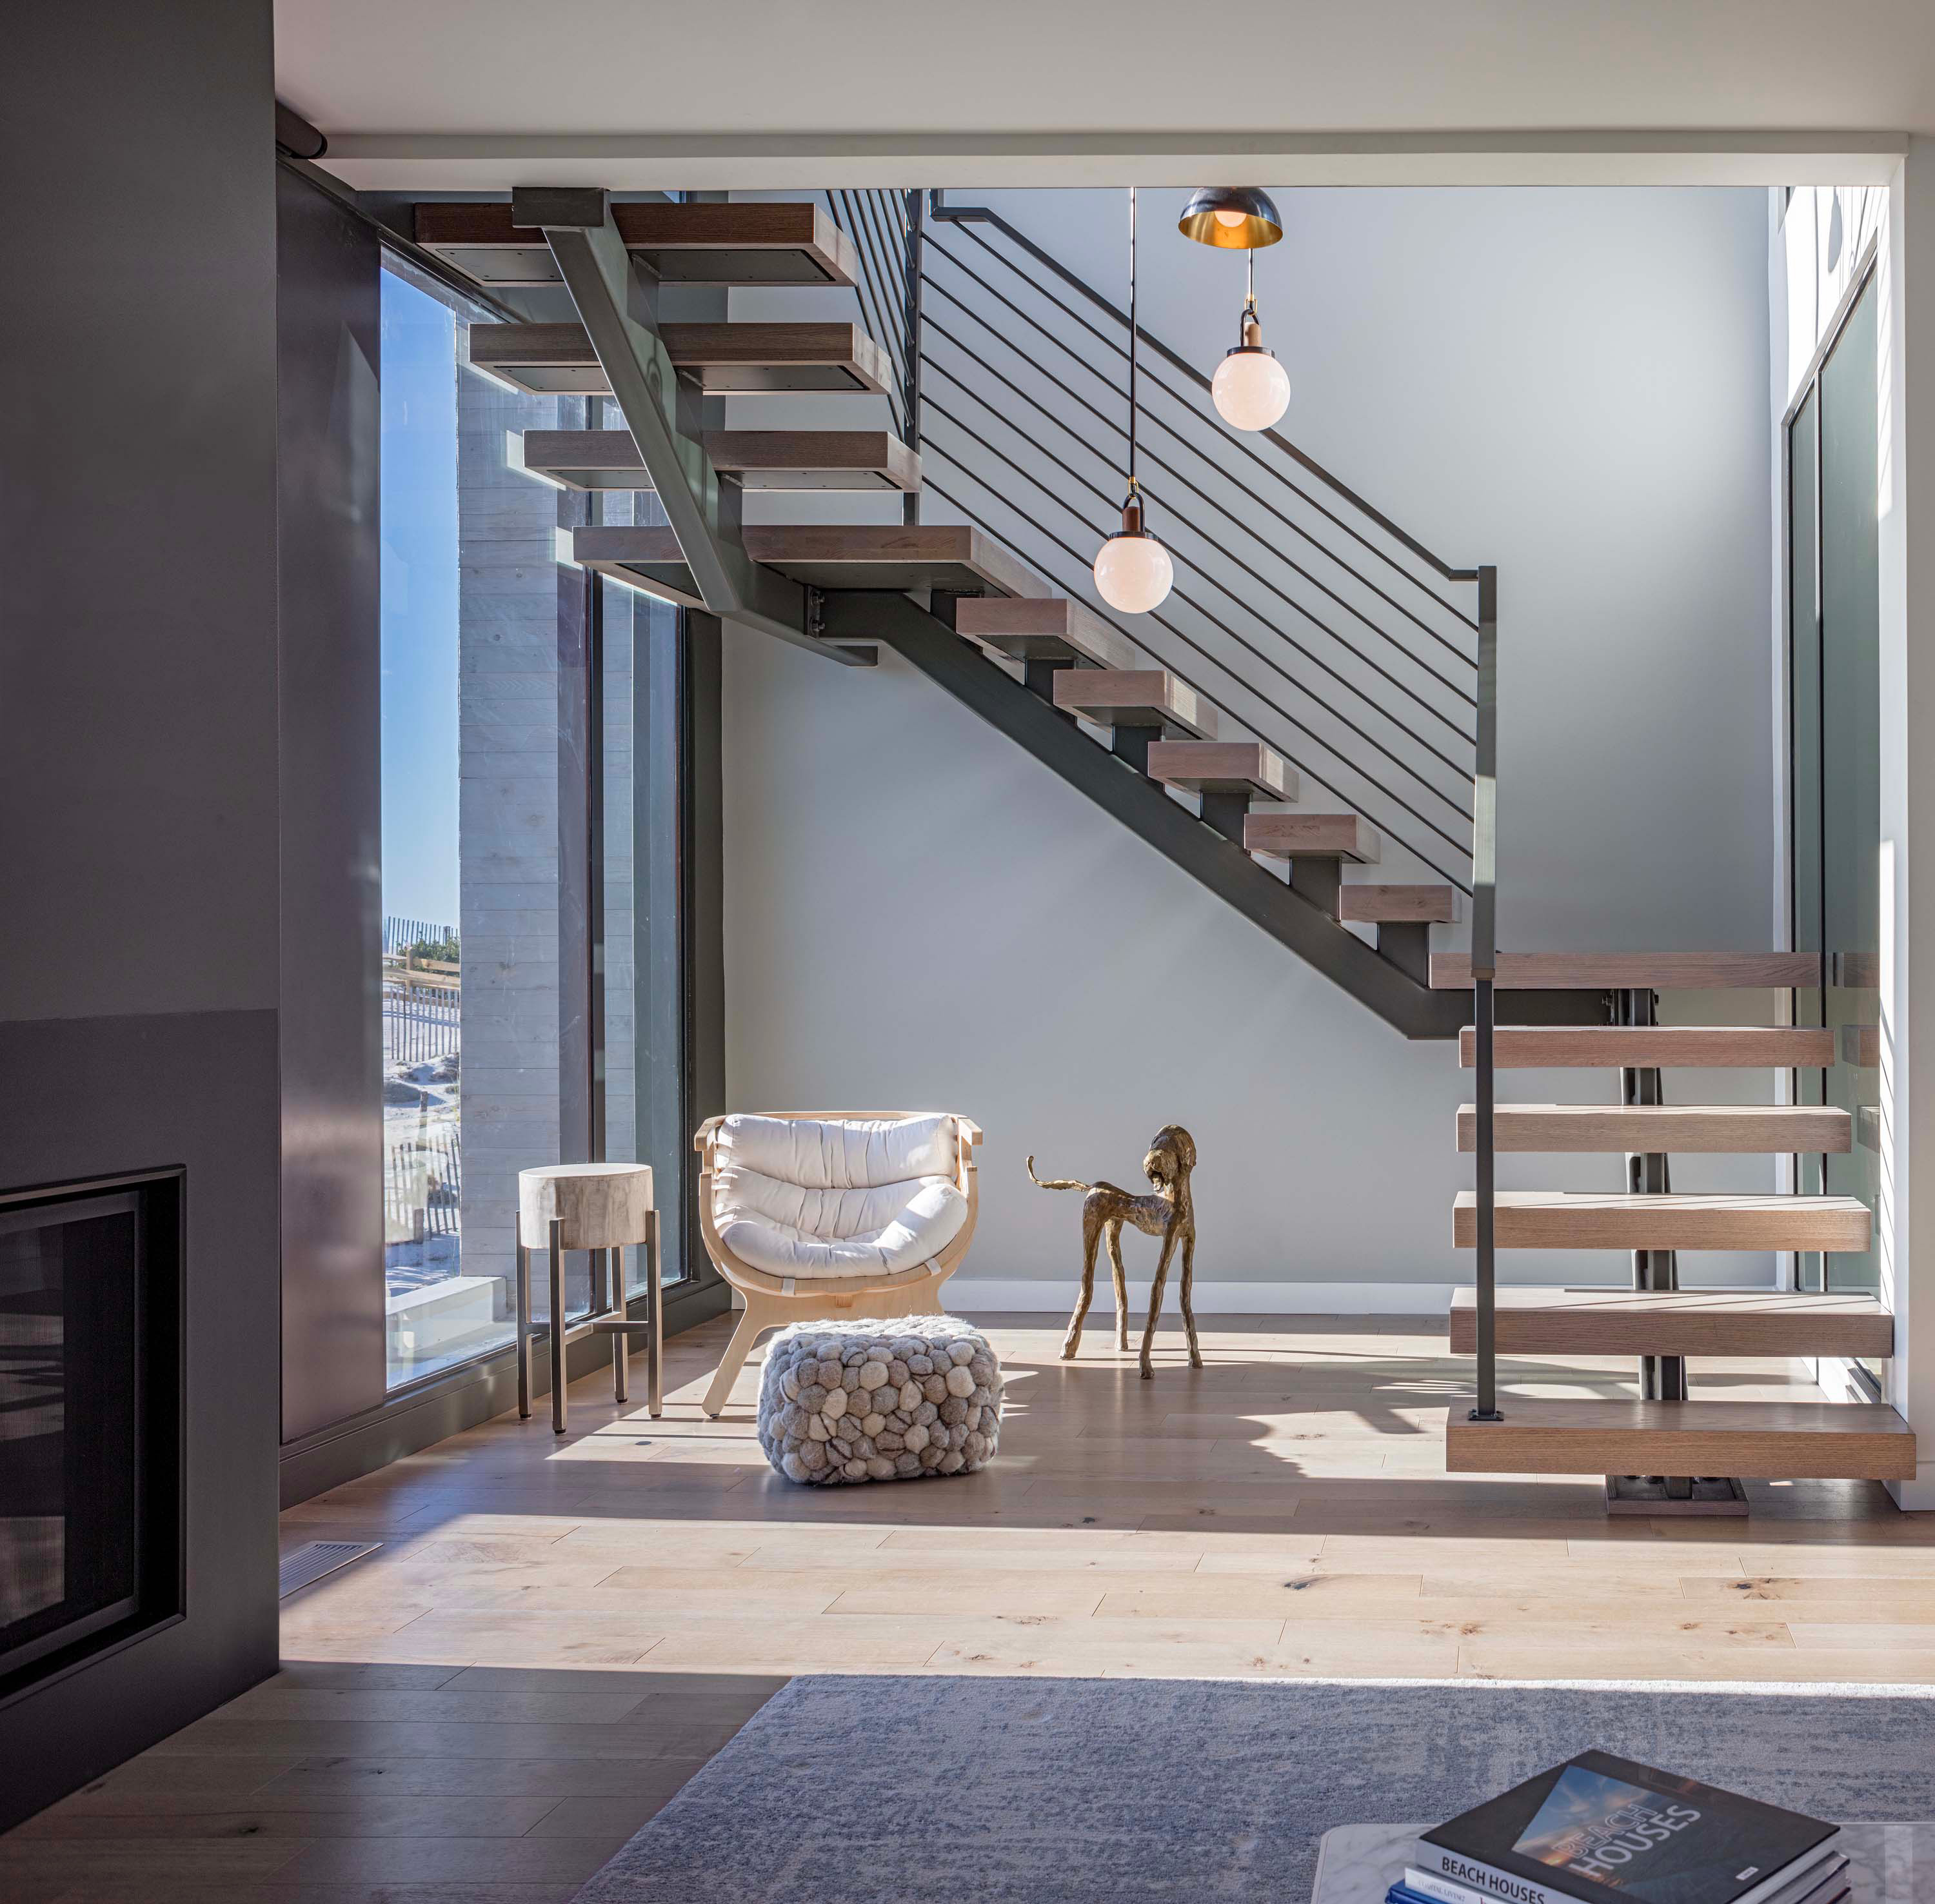 Interior photo of the Beach Haven Residence by Specht Novak Architects. Shot by Taggart Sorenson featuring brightly illuminated stairs and lounging area below them.